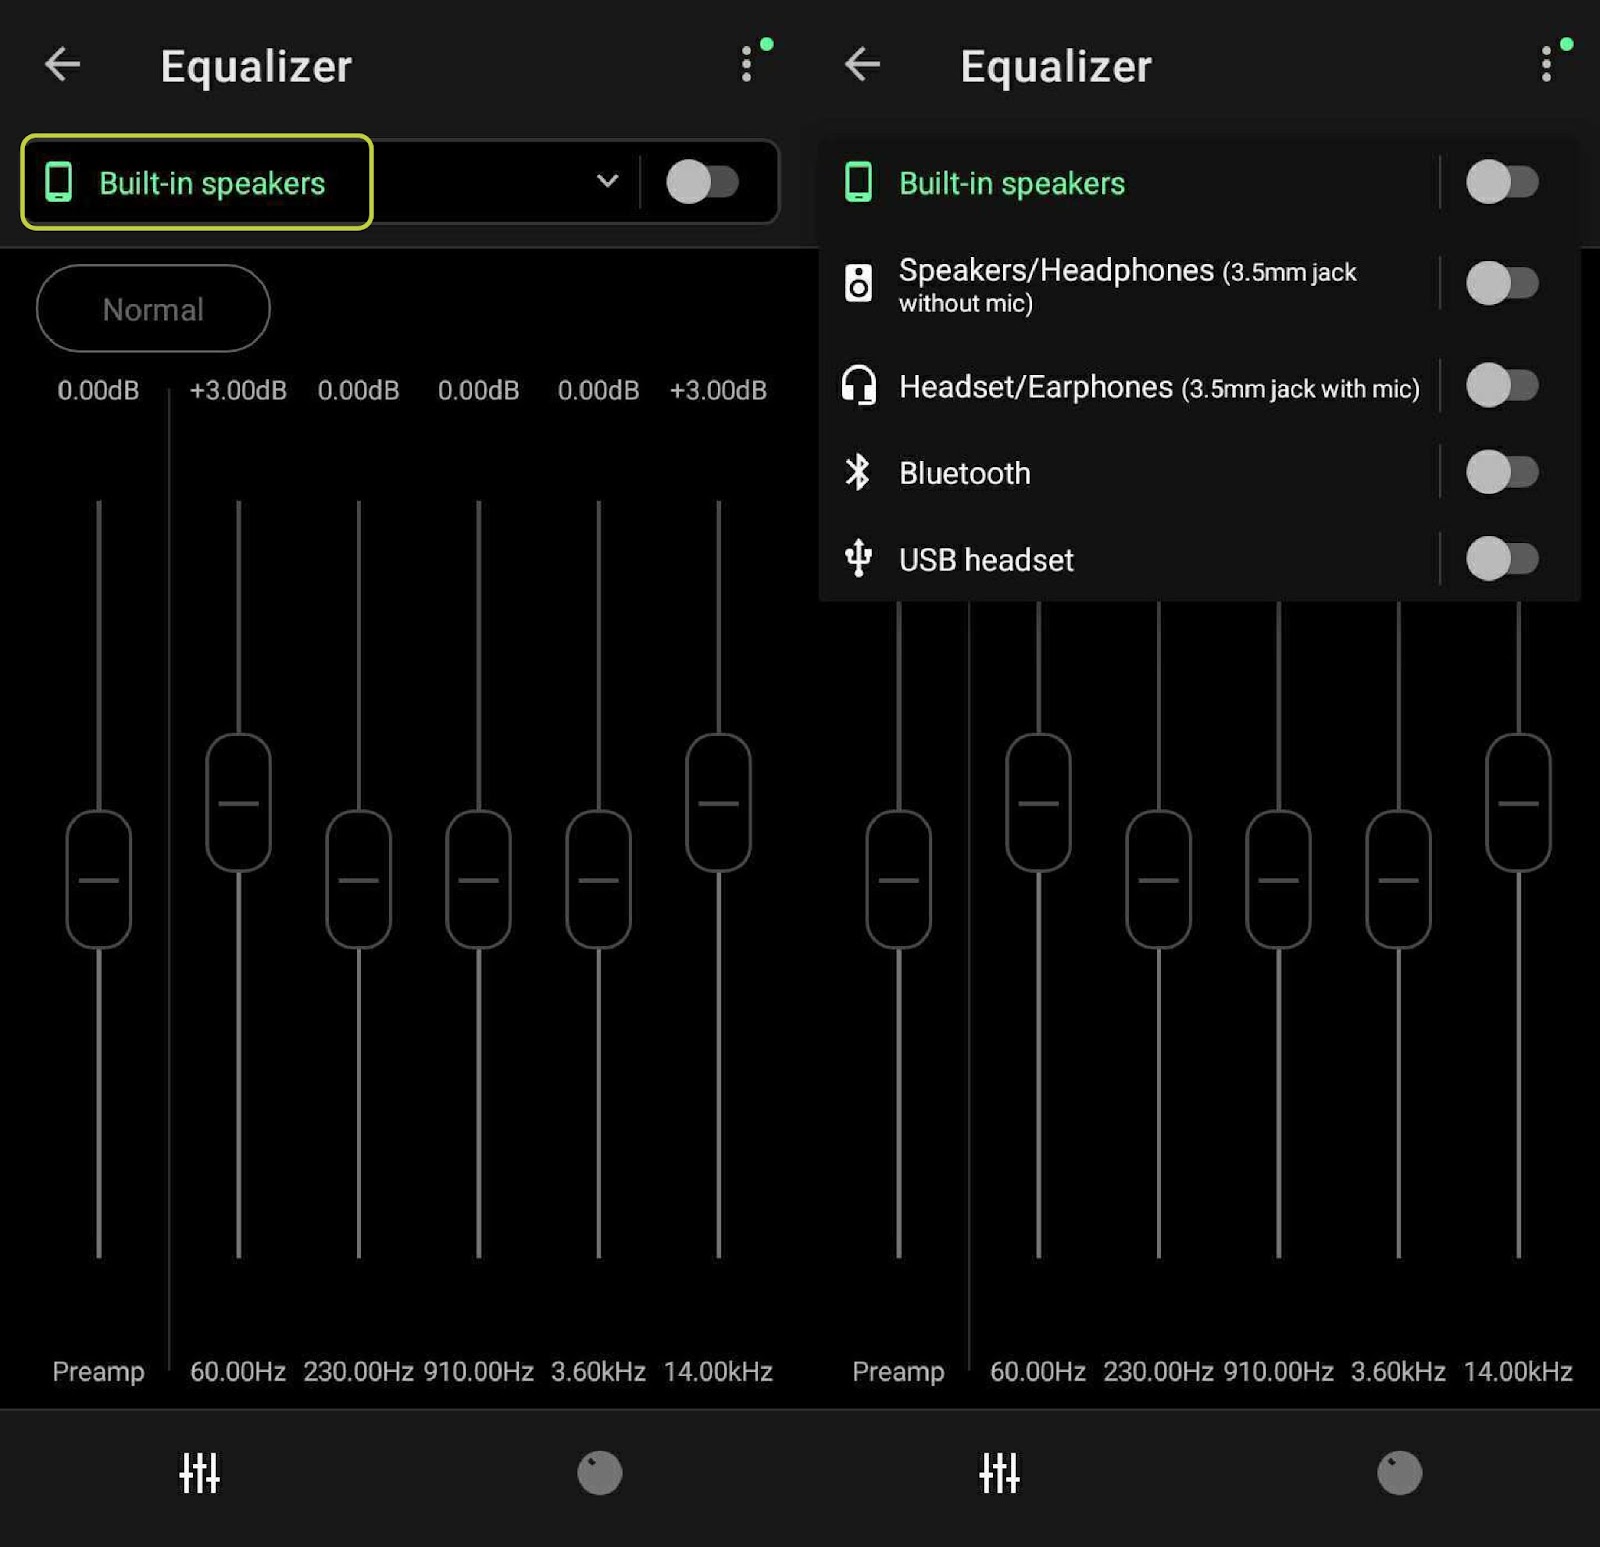 Tap on the presets to find settings that are appropriate depending on what device you're listening on